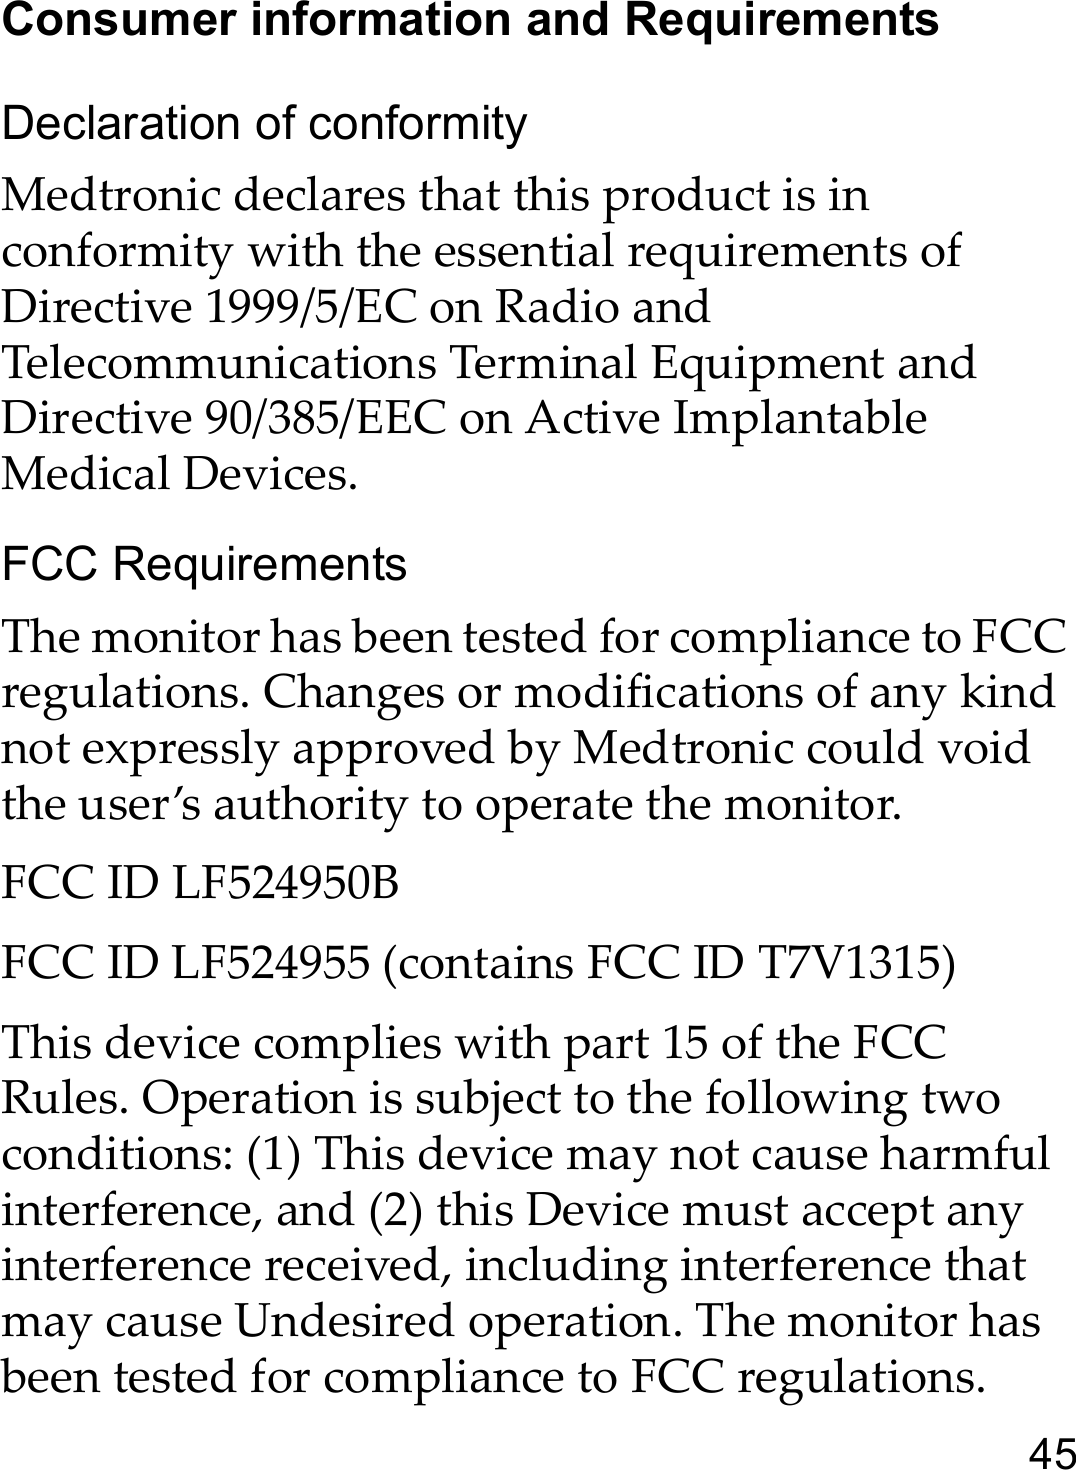 45Consumer information and RequirementsDeclaration of conformityMedtronic declares that this product is in conformity with the essential requirements of Directive 1999/5/EC on Radio and Telecommunications Terminal Equipment and Directive 90/385/EEC on Active Implantable Medical Devices.FCC RequirementsThe monitor has been tested for compliance to FCC regulations. Changes or modifications of any kind not expressly approved by Medtronic could void the user’s authority to operate the monitor.FCC ID LF524950BFCC ID LF524955 (contains FCC ID T7V1315) This device complies with part 15 of the FCC Rules. Operation is subject to the following two conditions: (1) This device may not cause harmful interference, and (2) this Device must accept any interference received, including interference that may cause Undesired operation. The monitor has been tested for compliance to FCC regulations. 